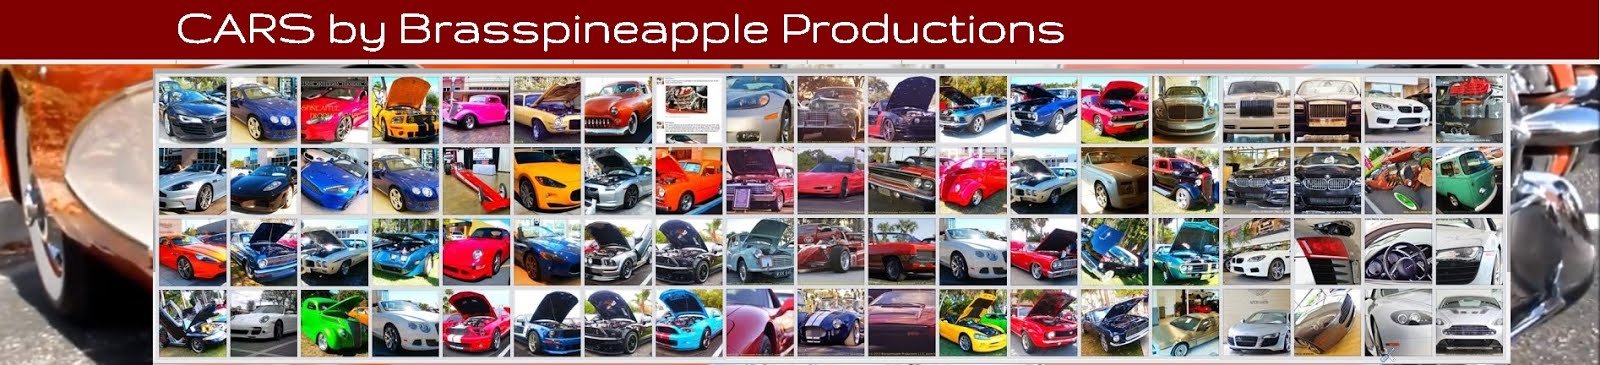 CARS by Brasspineapple Productions